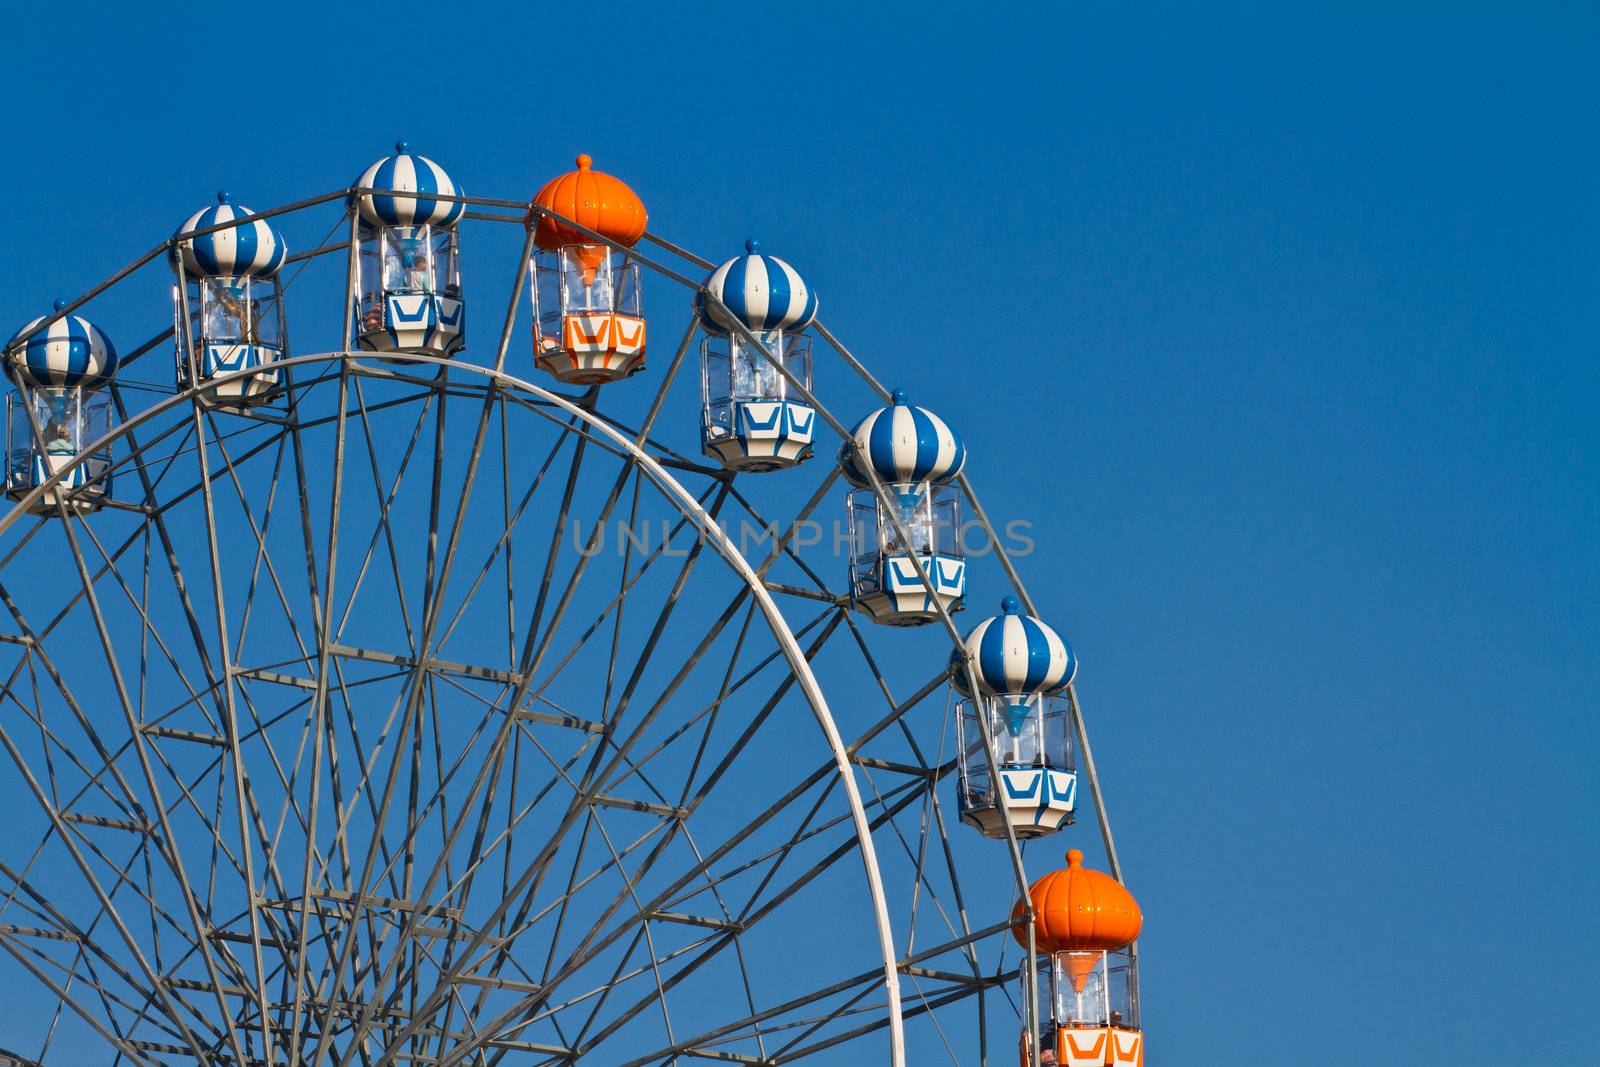 Colorful ferris wheel on the blue sky